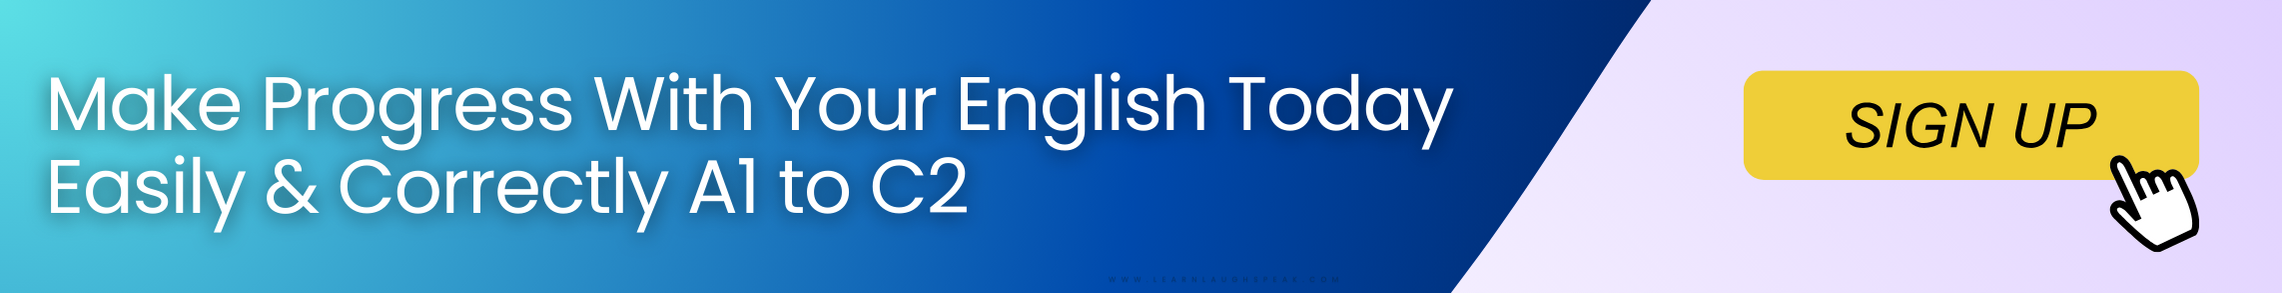 Make Progress With Your English Today Easily & Correctly A1 to C2